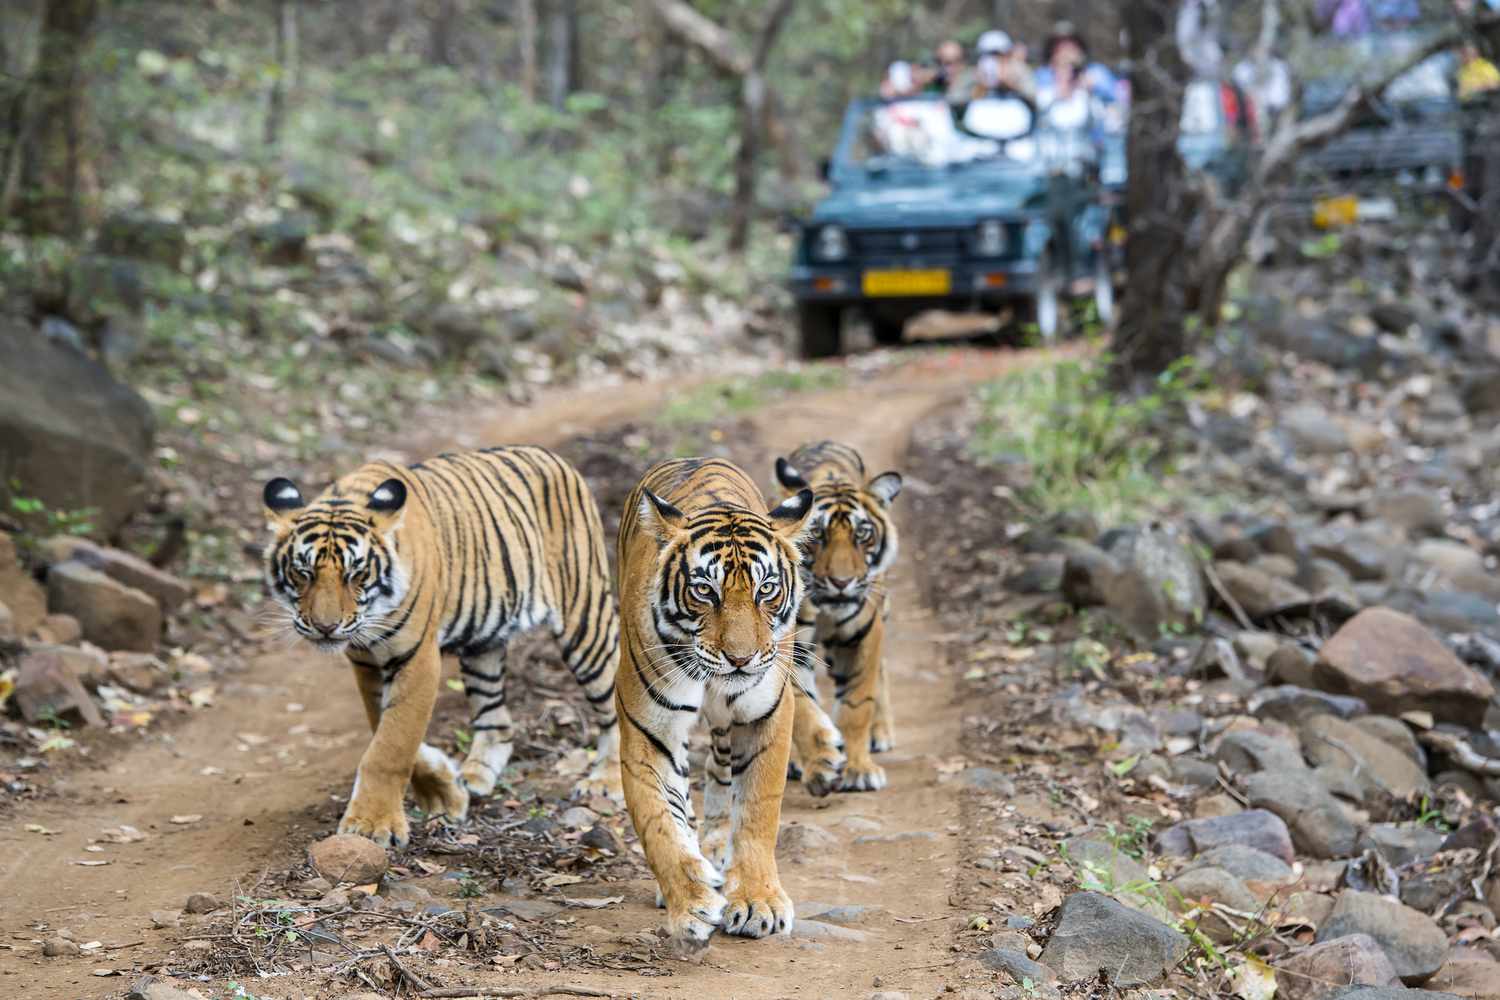 What to see near Ranthambore National Park